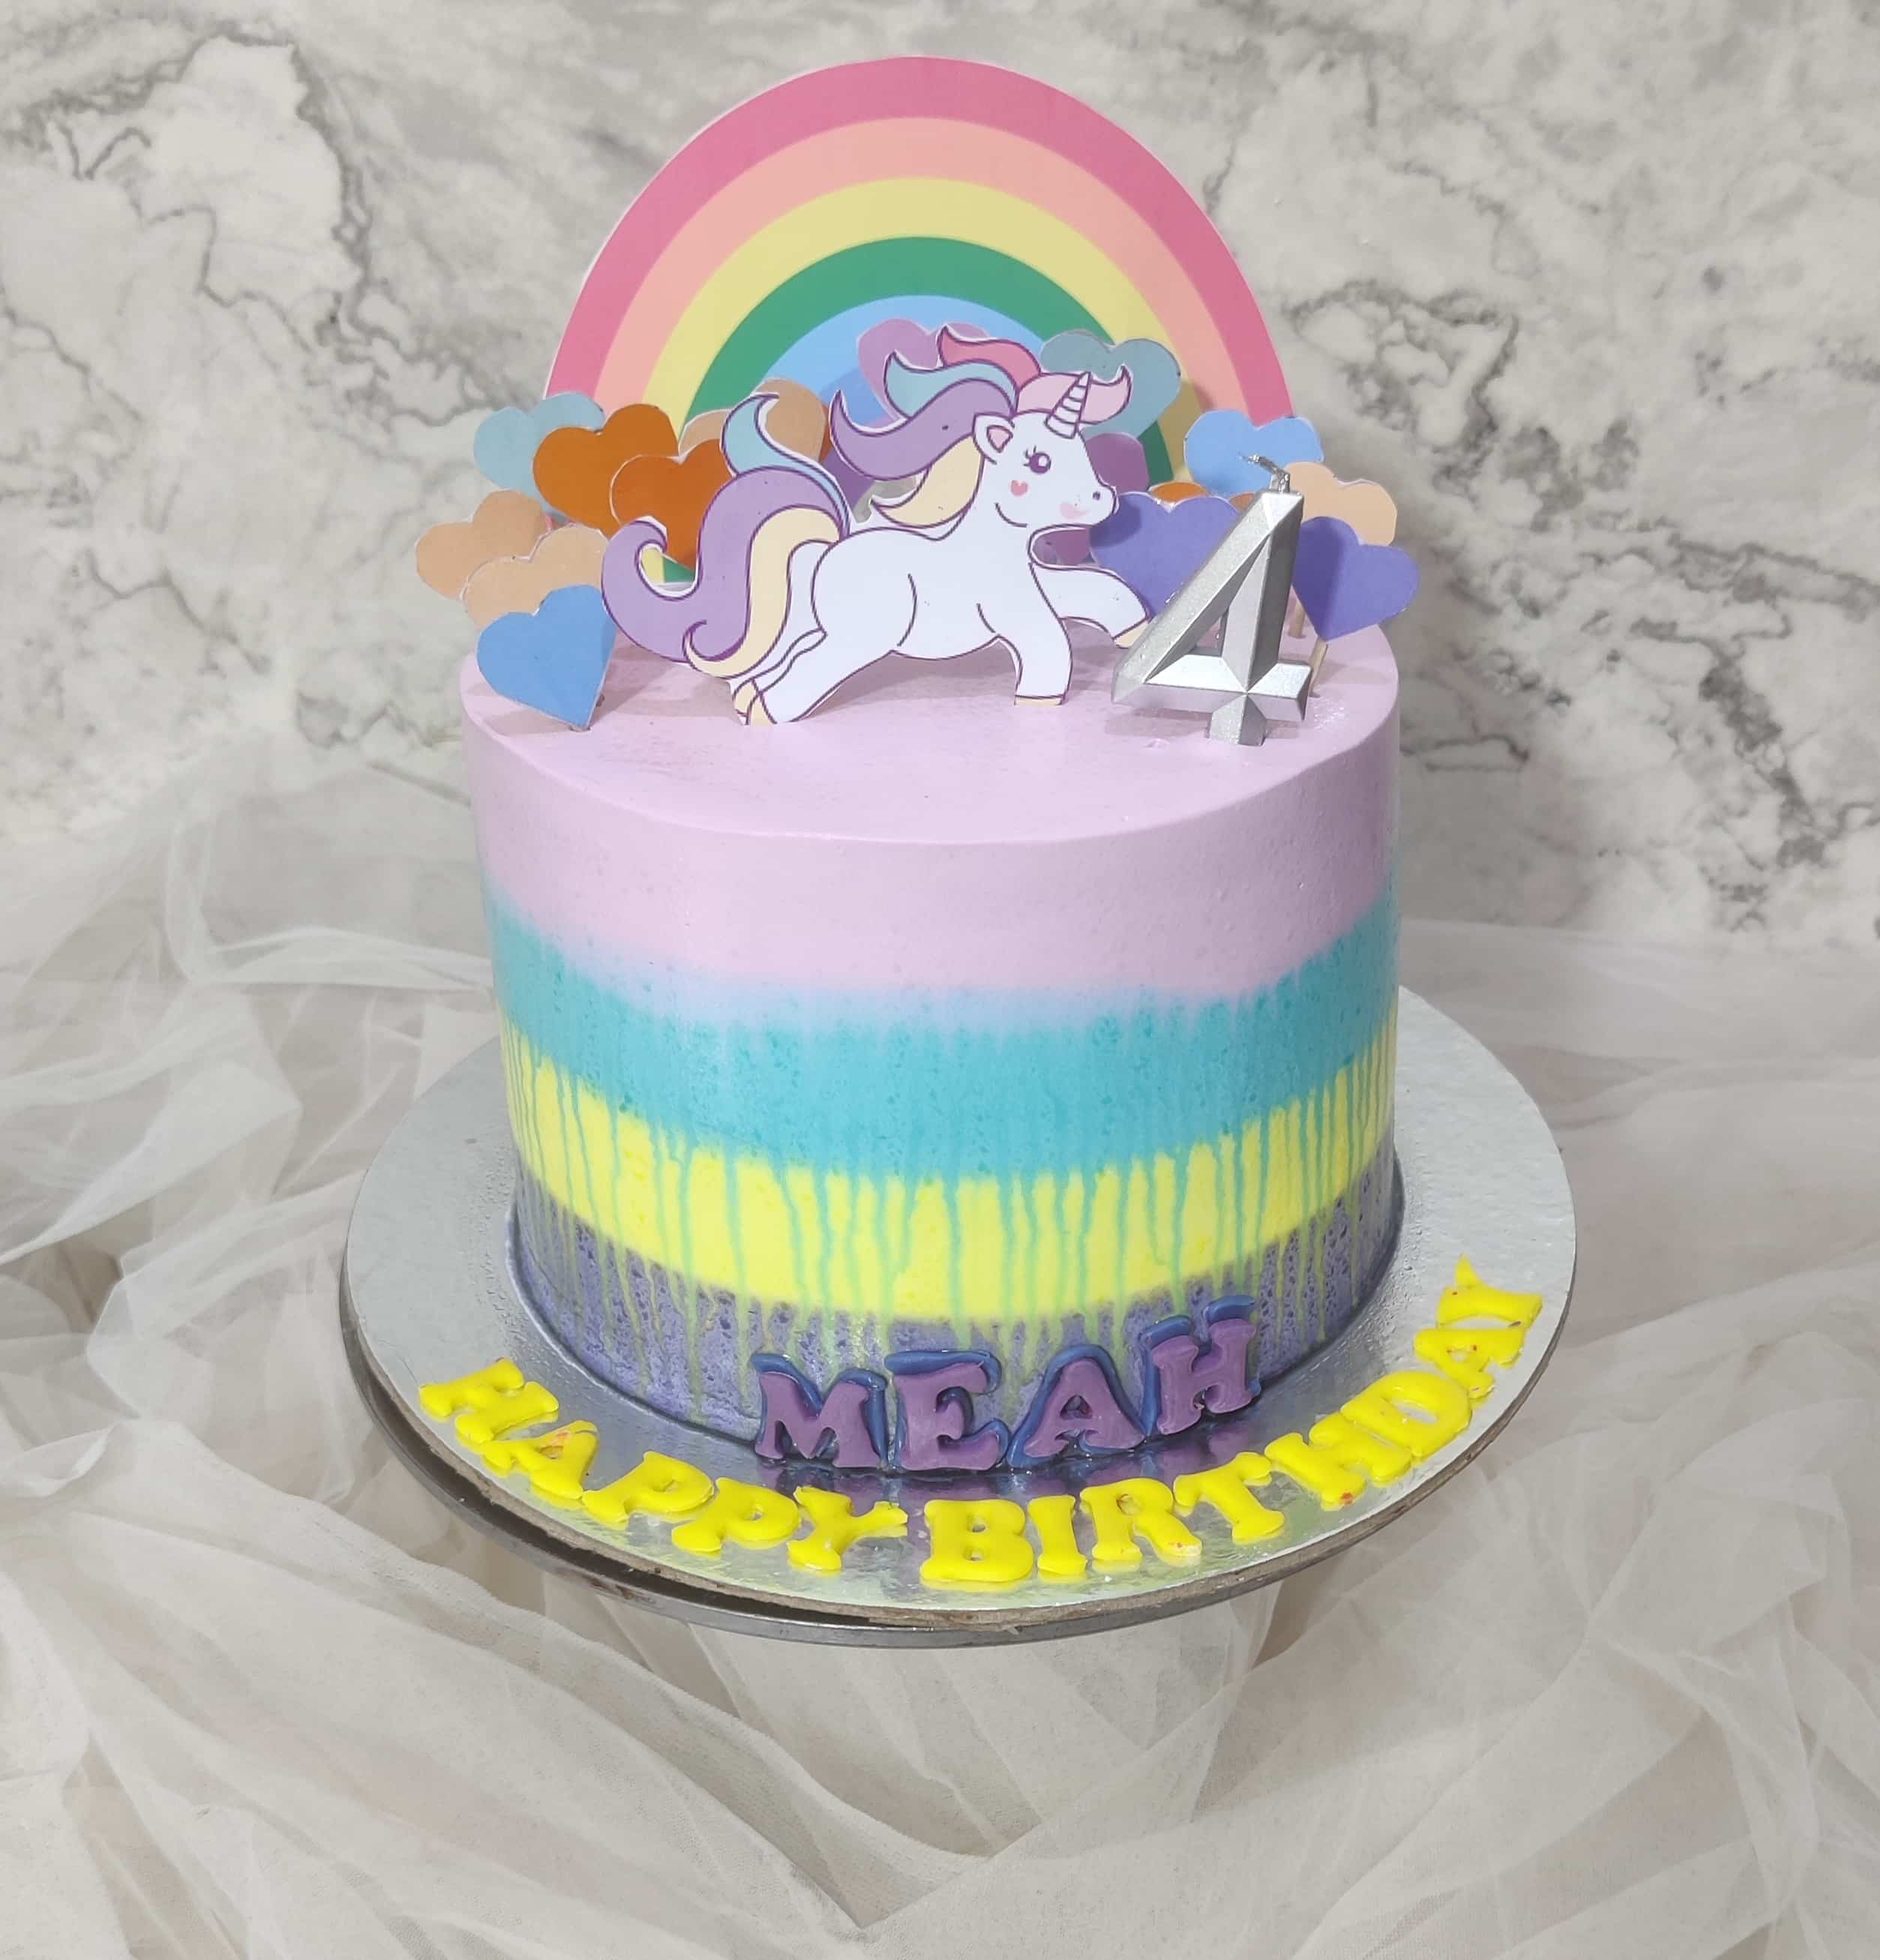 Cake for Children on Birthday Celebration with Homemade Little Princess and Unicorn  Fondant Figures Stock Photo - Image of icing, princess: 172276674